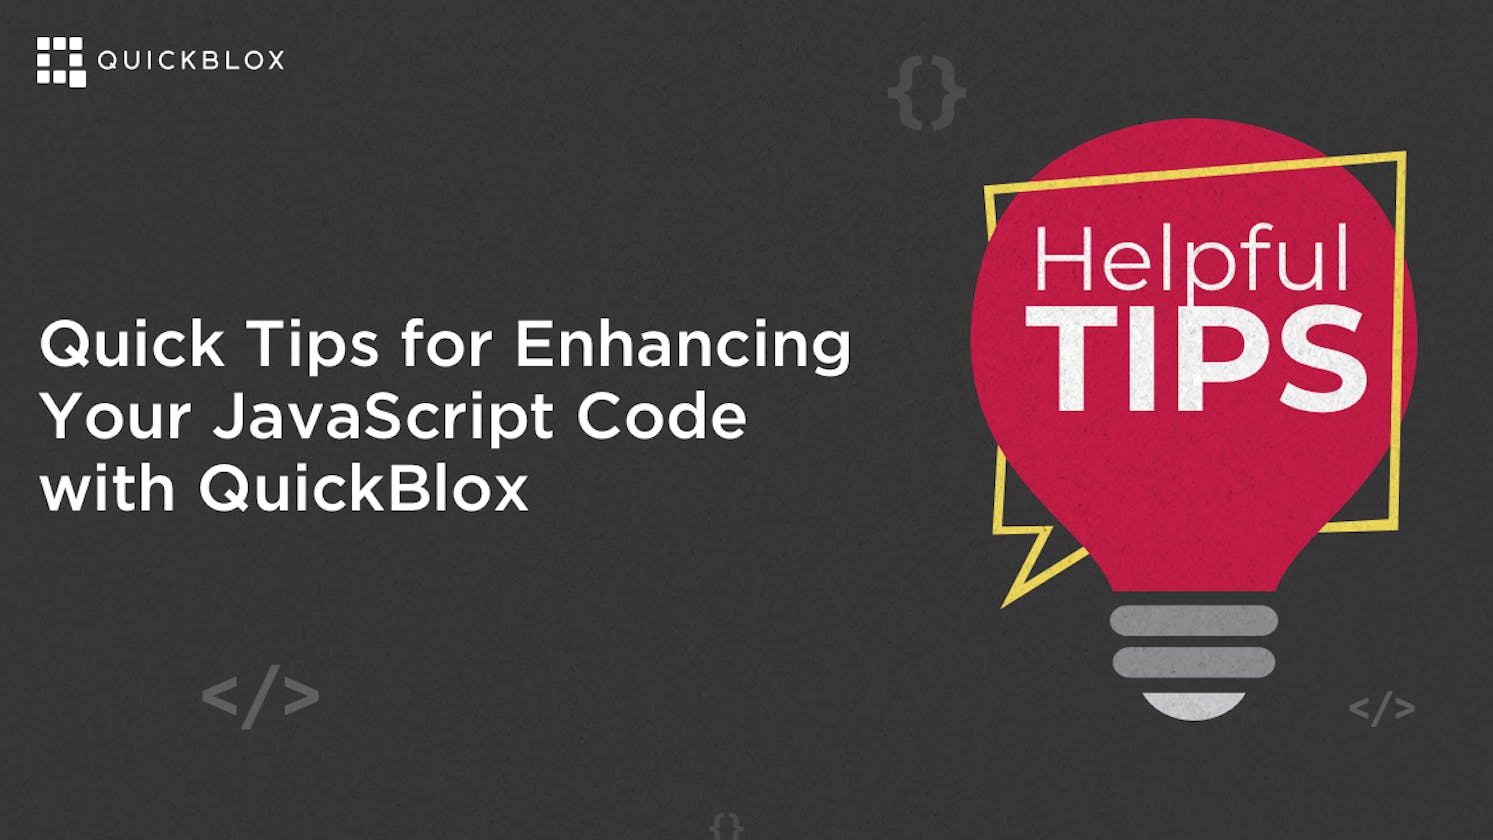 Quick Tips for Enhancing Your JavaScript Code with QuickBlox